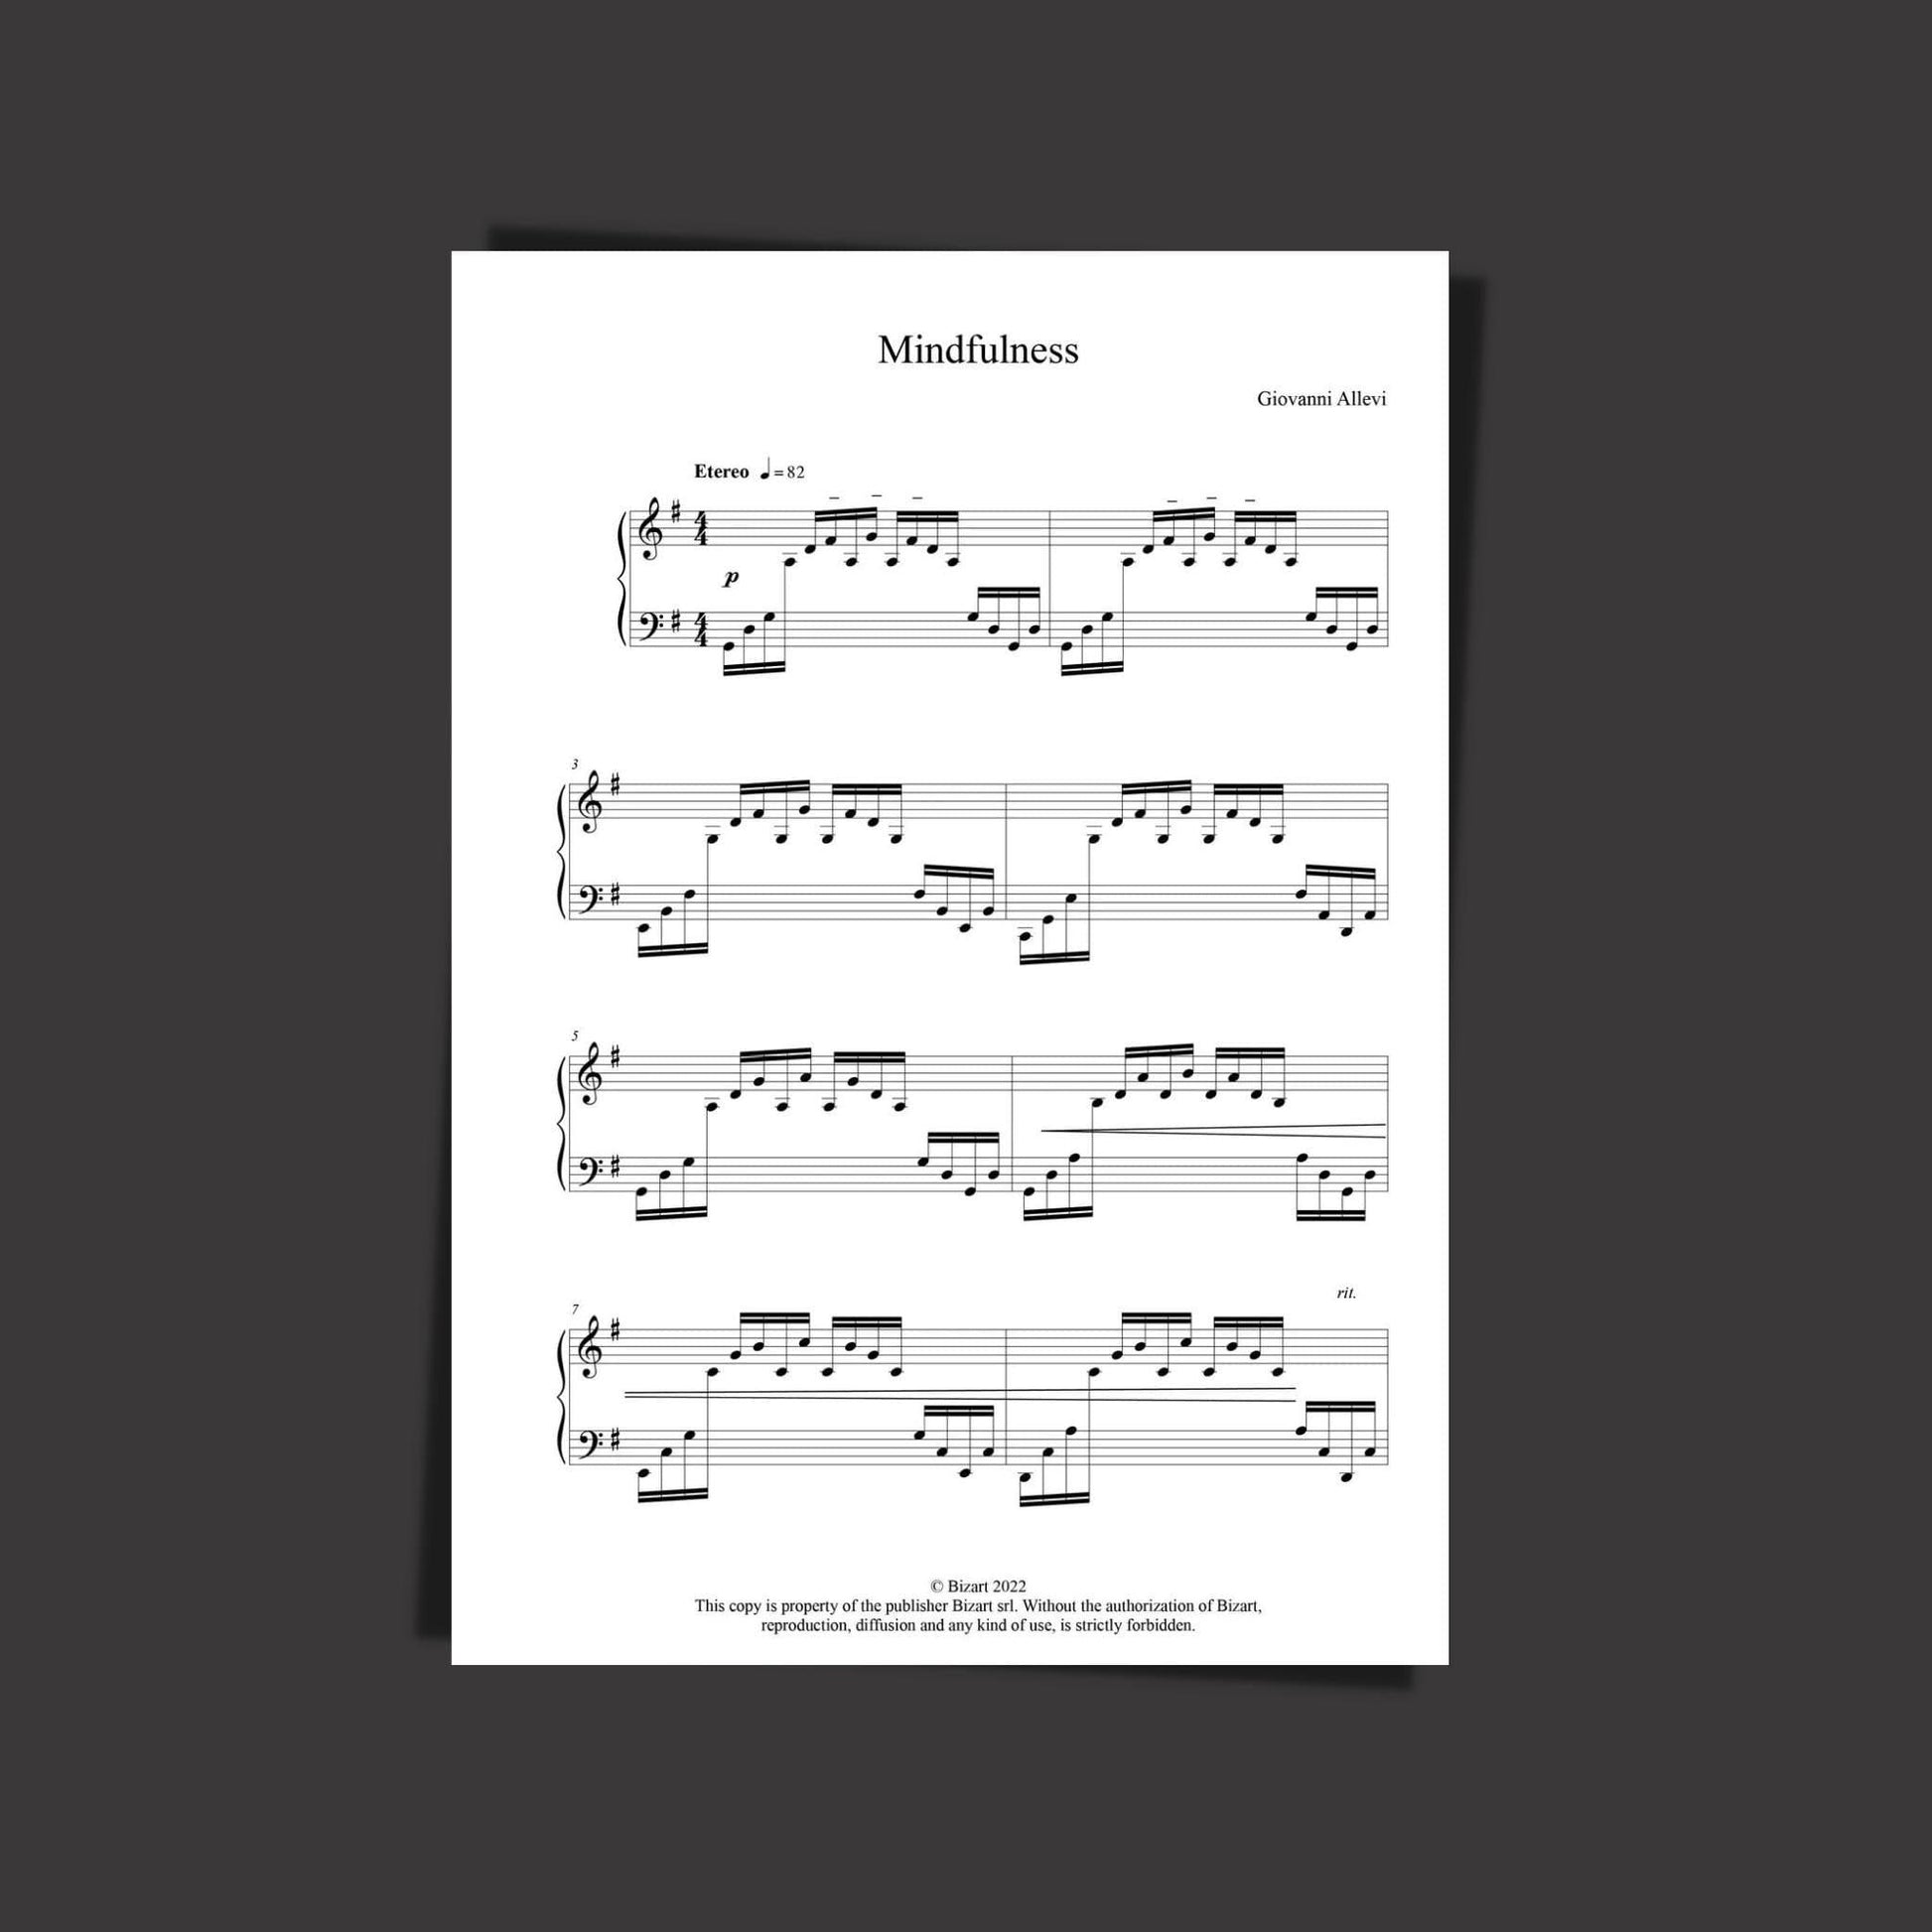 MINDFULNESS by composer and pianist GIOVANNI ALLEVI - digital sheet music opening